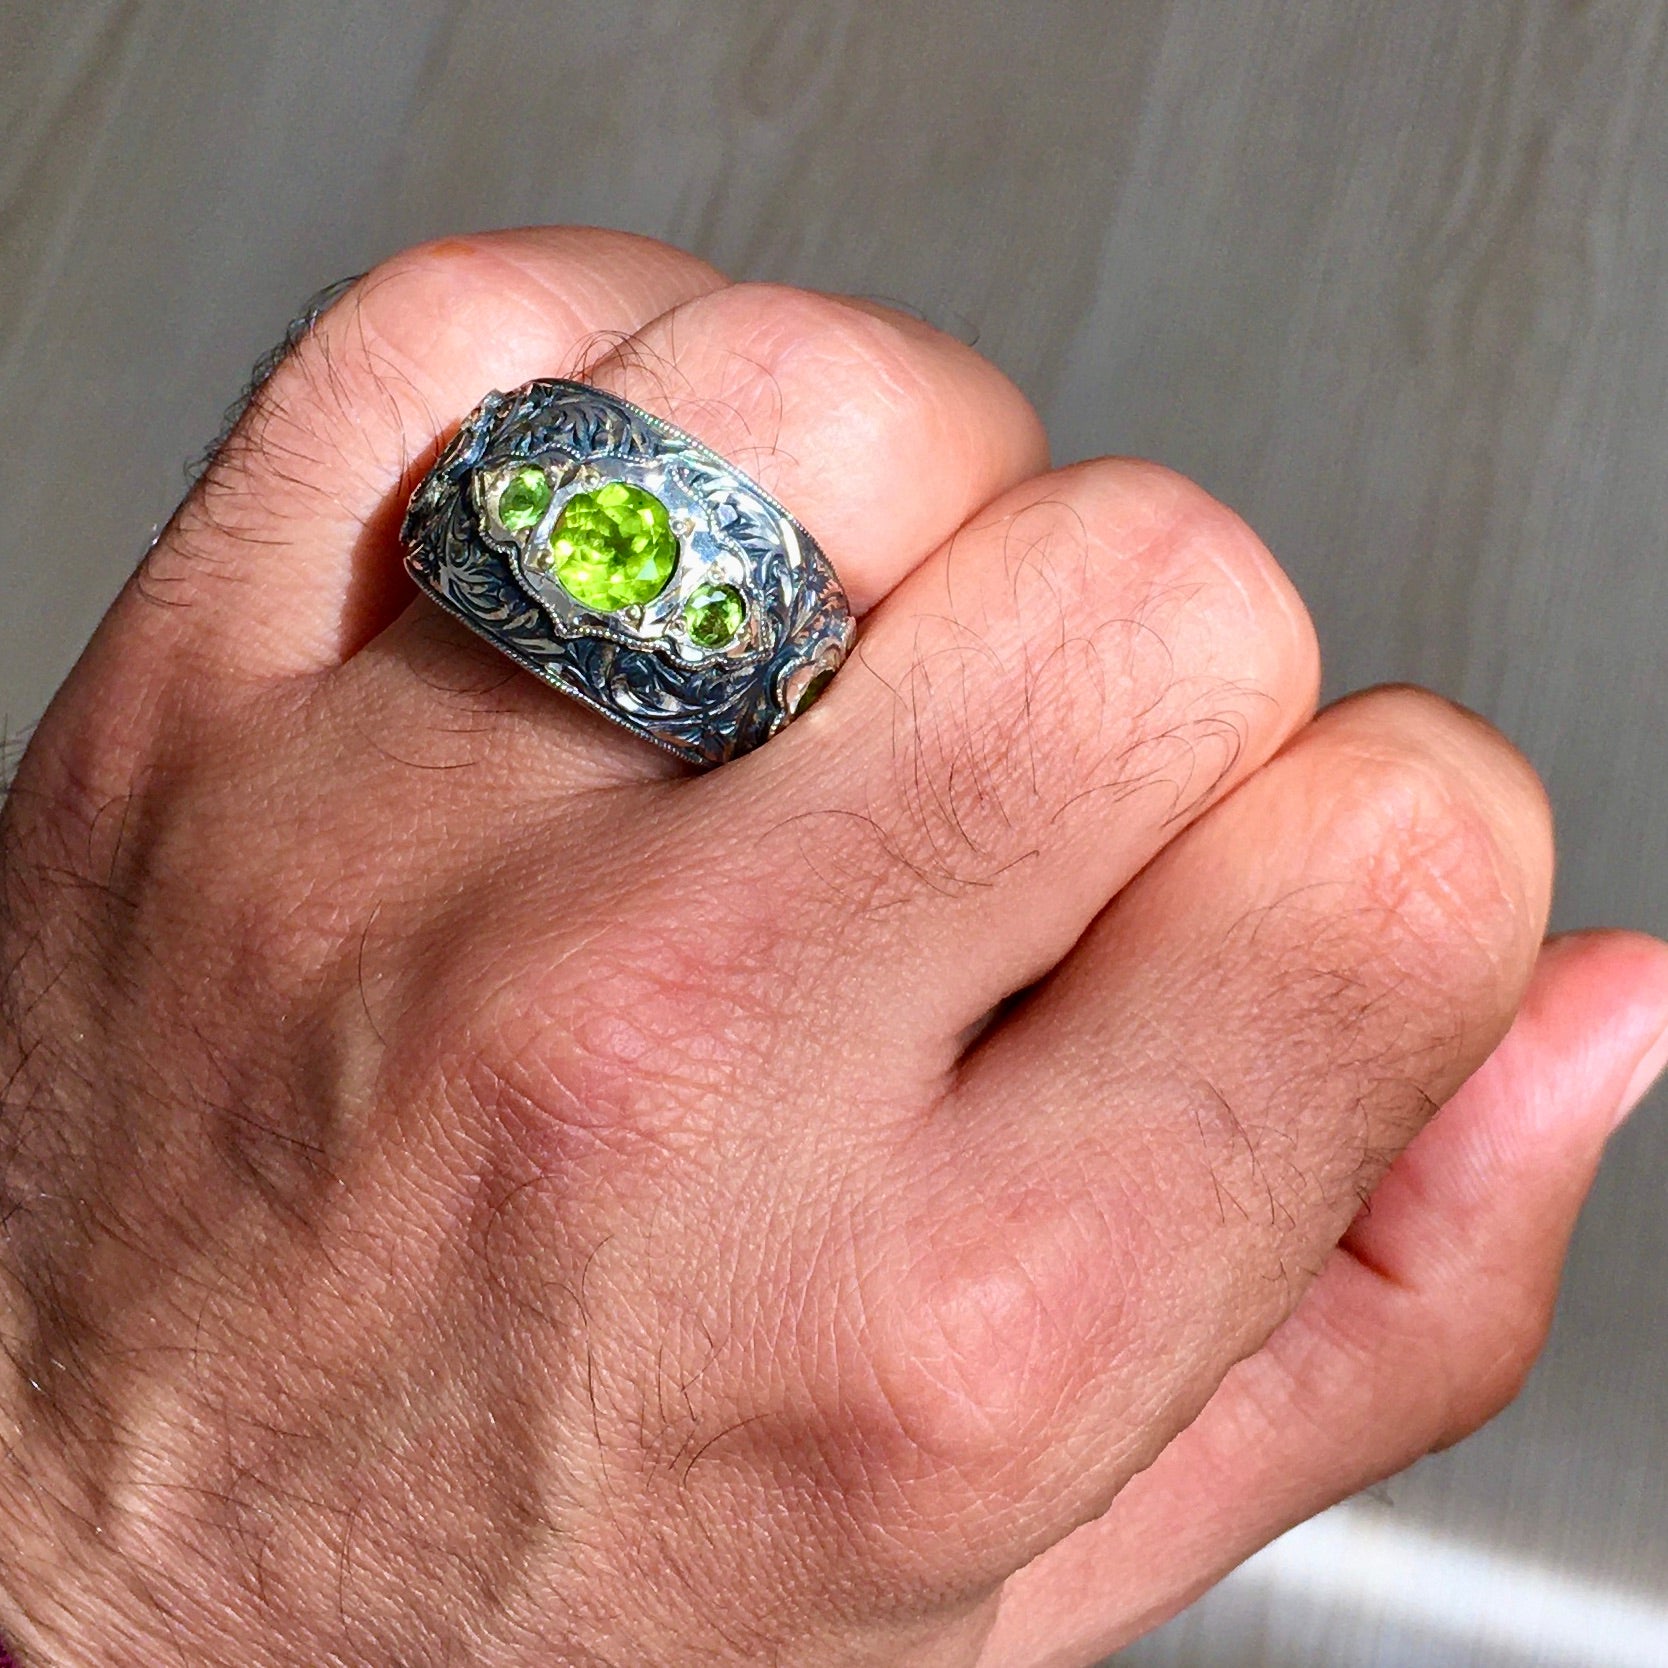 Handmade 925 Sterling Silver Peridot Signet Mens Ring, Weight: 8g Approx,  4-16 Us Size Available at Rs 1500/piece in Jaipur